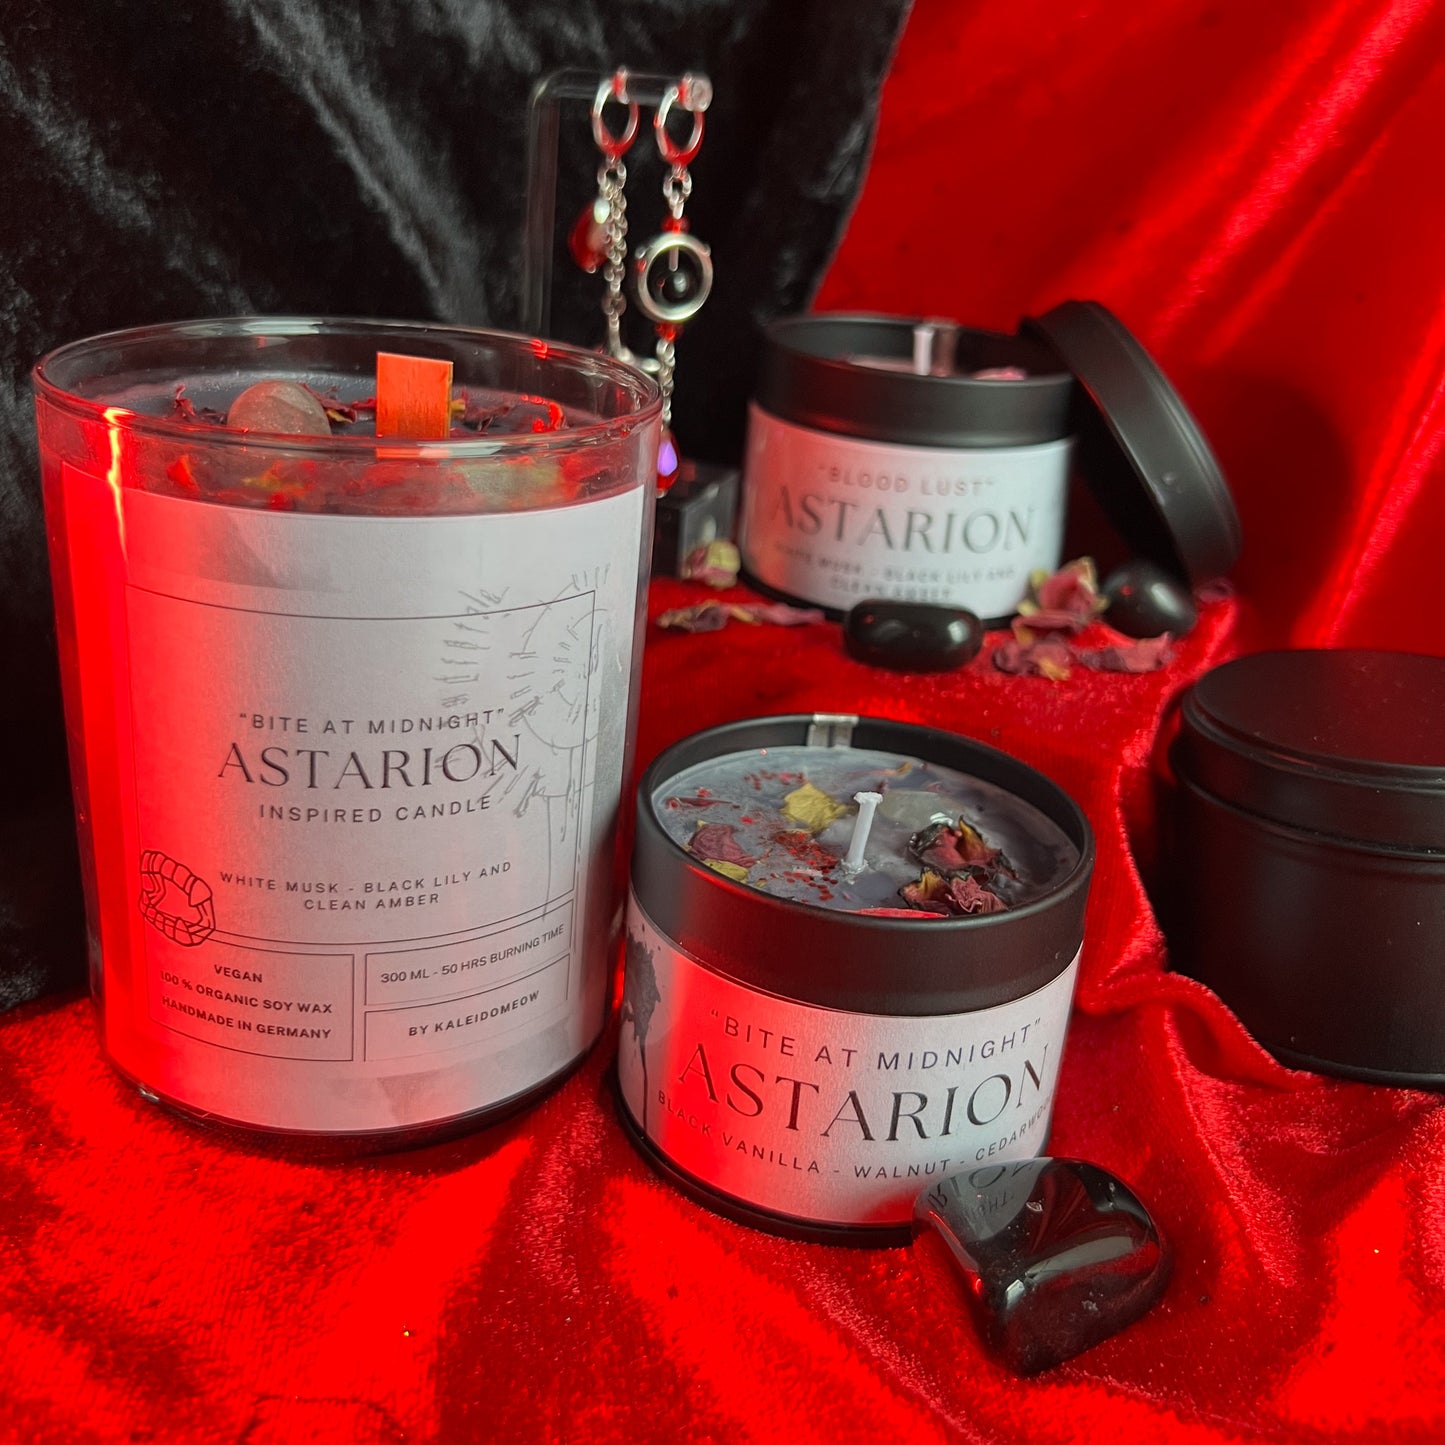 Astarion inspired candle "Bite at Midnight" - Baldurs Gate 3 inspired candle 100 ML